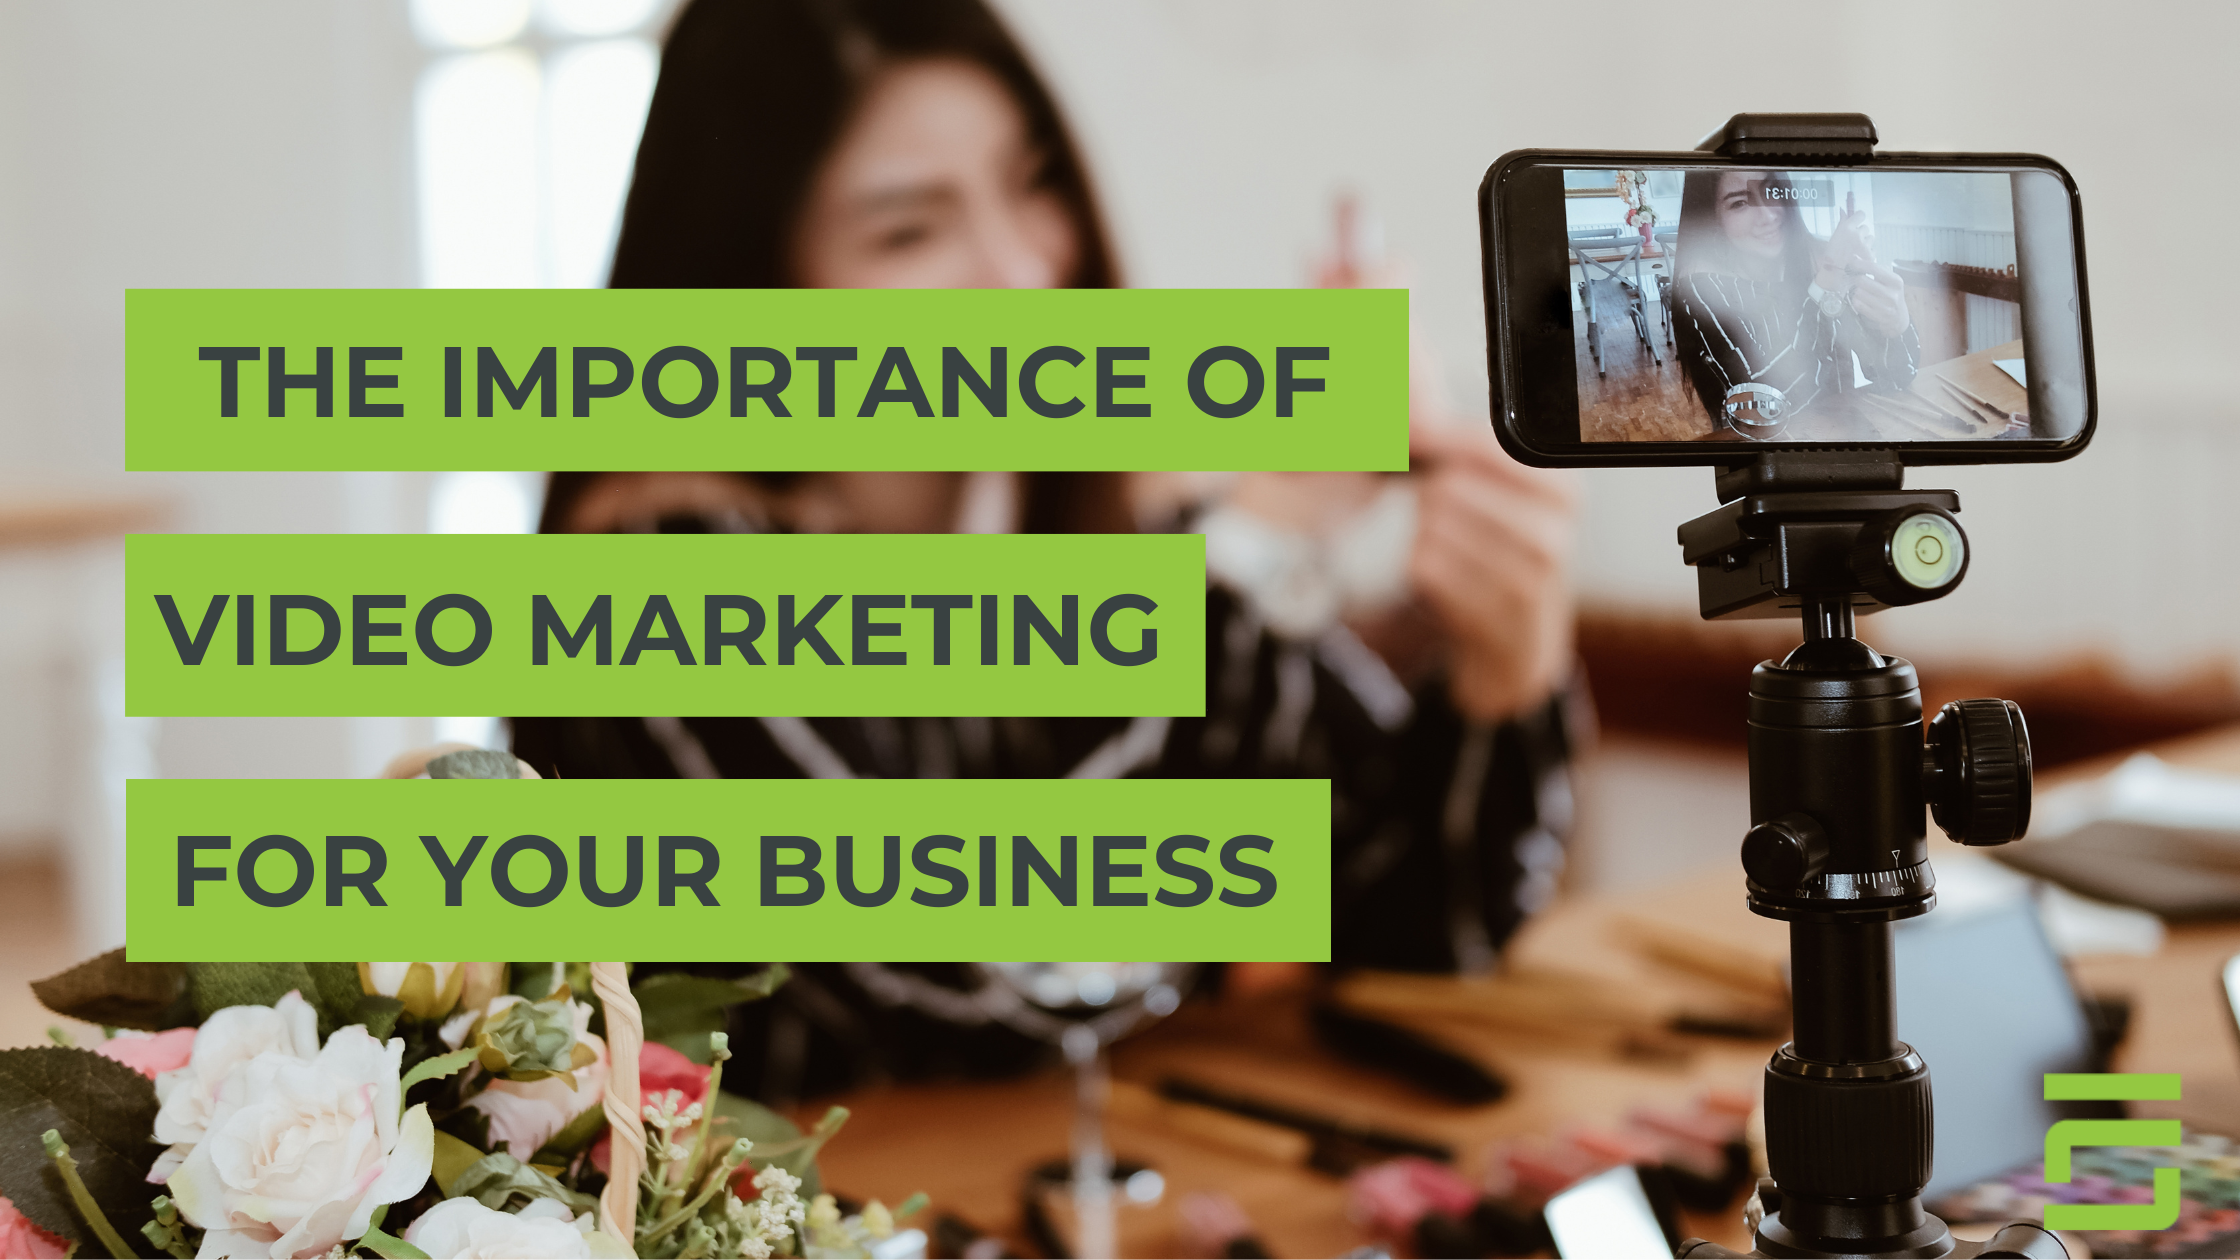 The importance of Video Marketing For Your Business